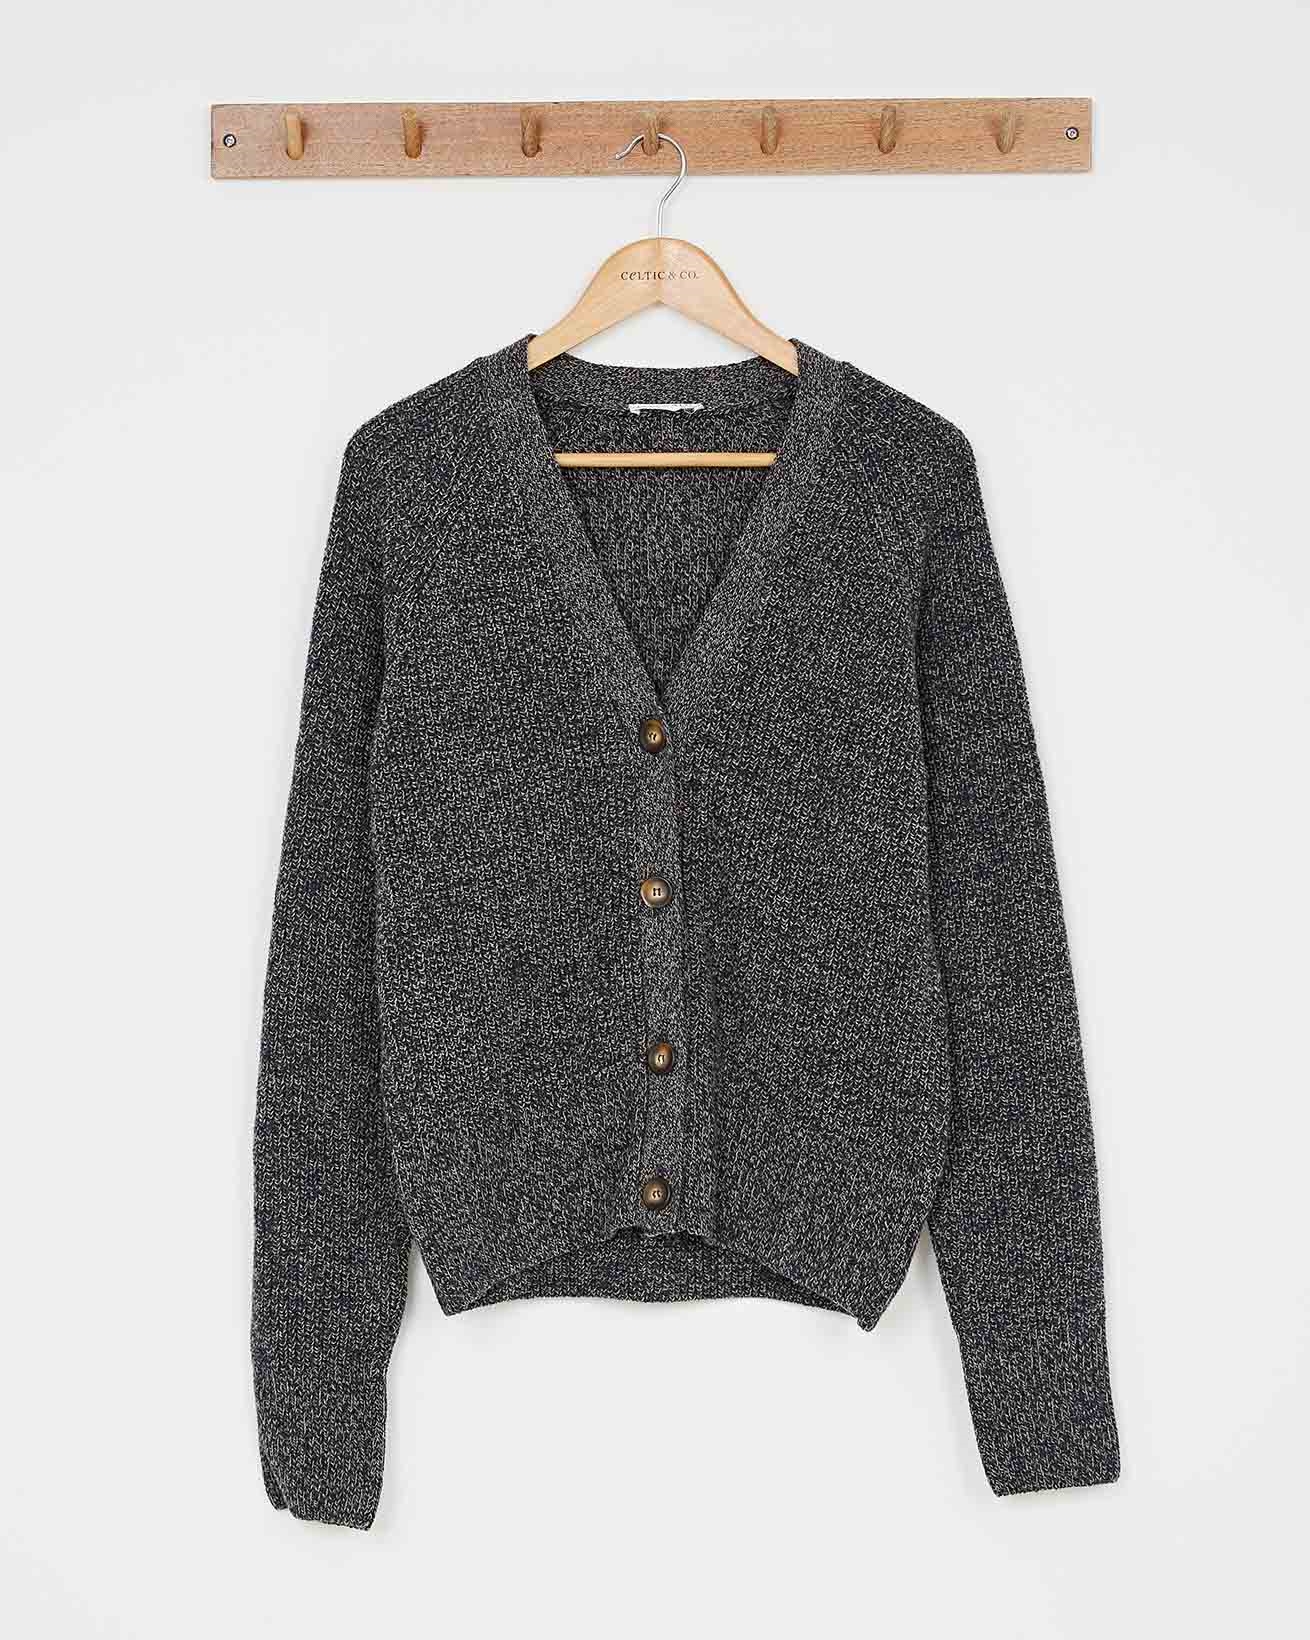 Lambswool Cotton Ribbed Cardigan / Navy / S